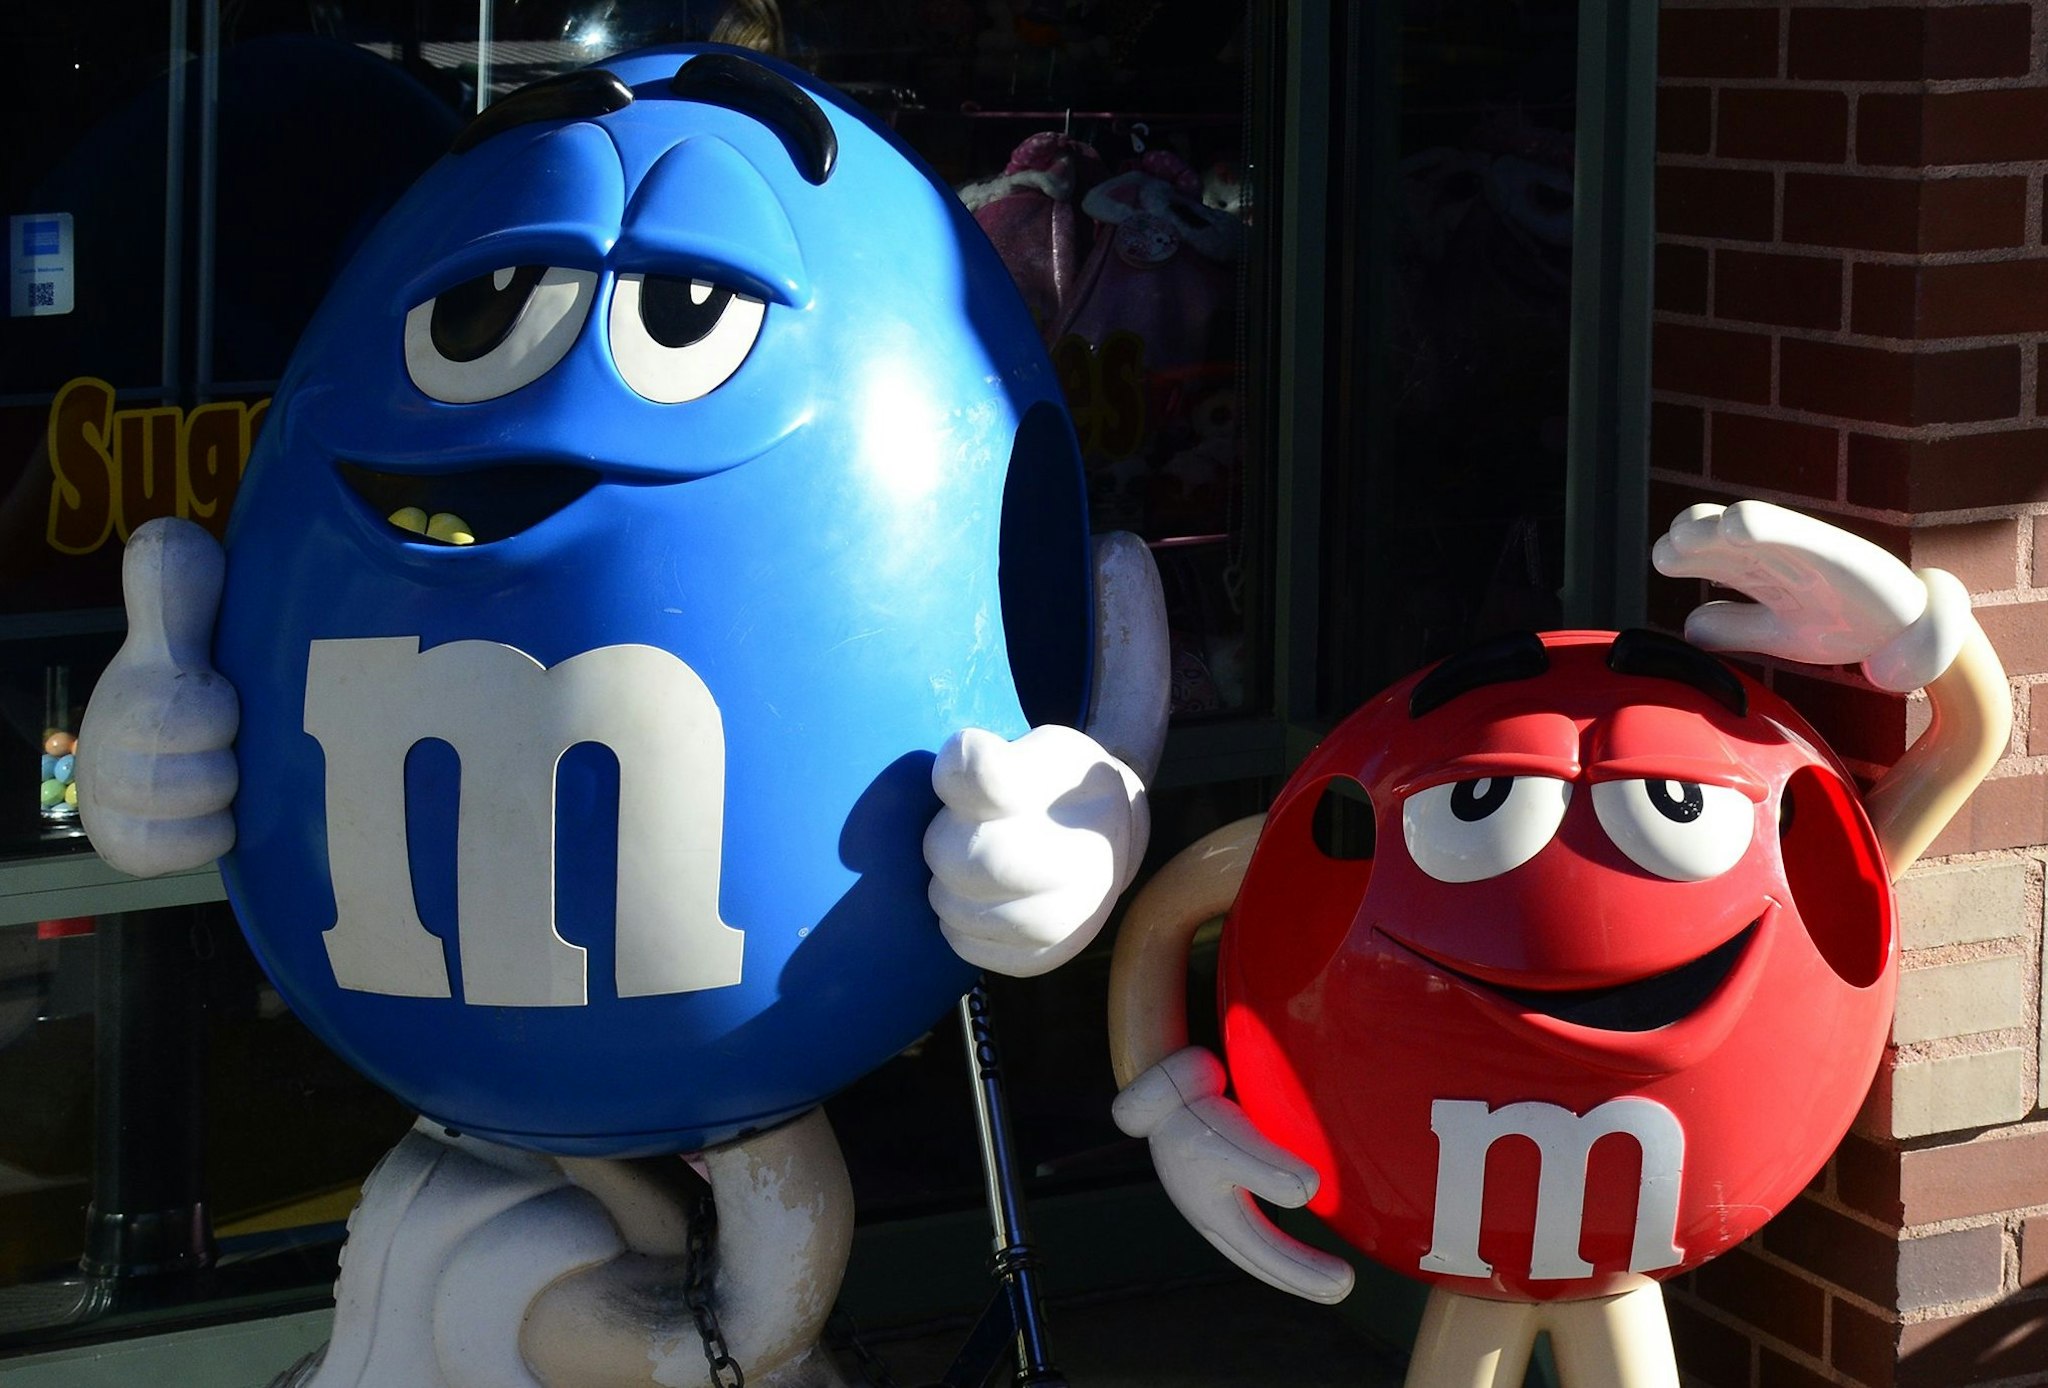 M&M's reveals new purple candy character, first in a decade